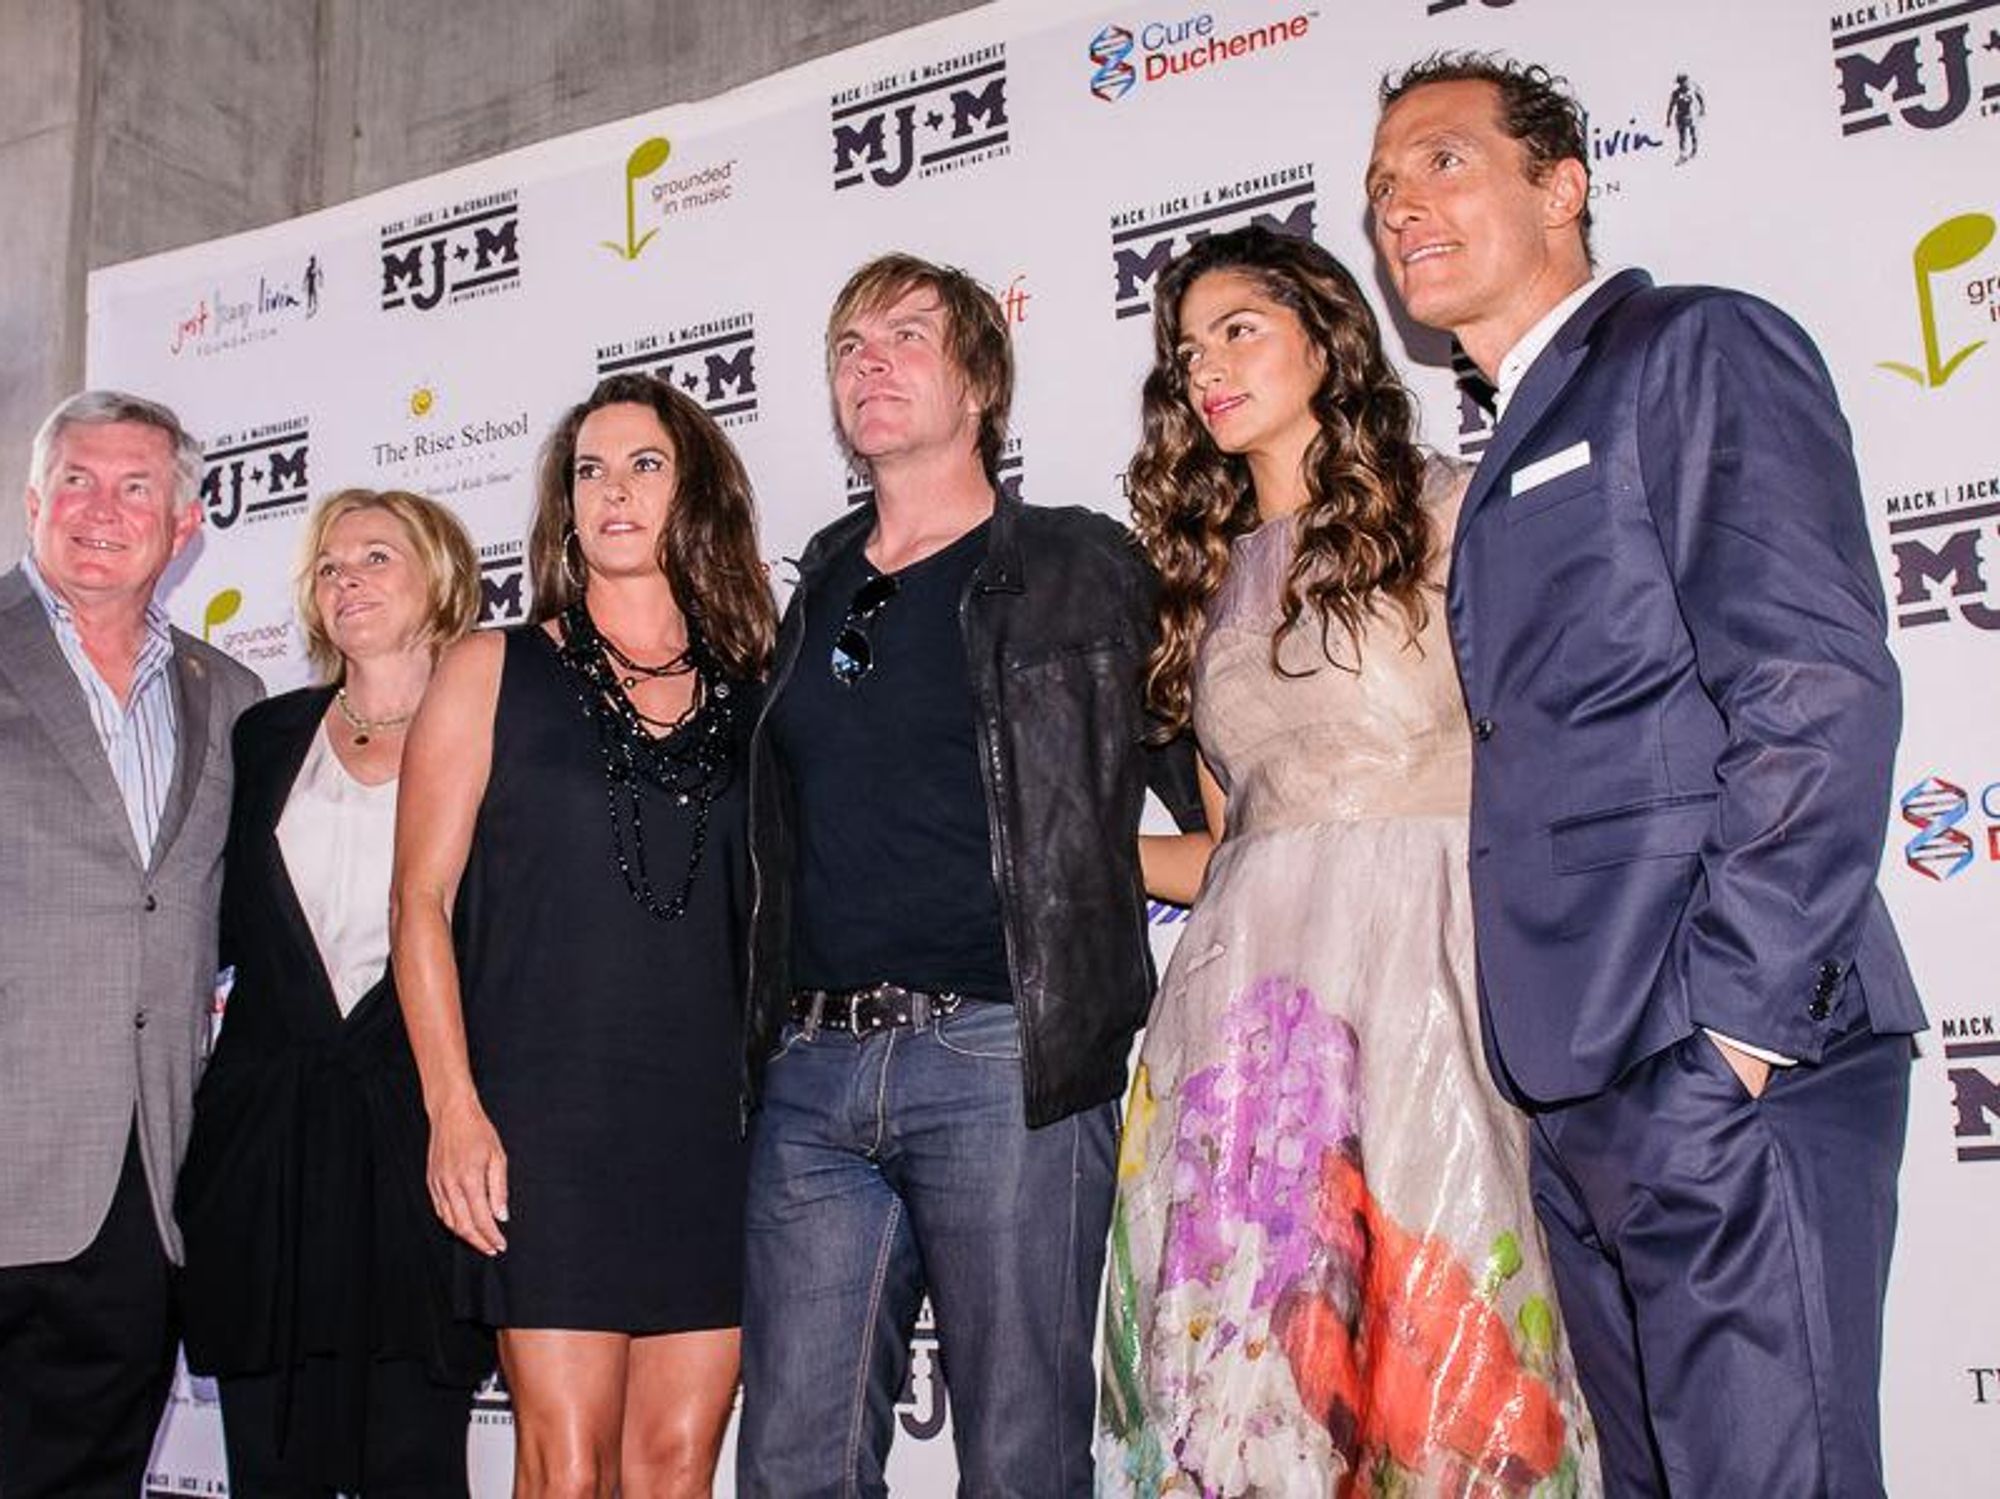 Mack Jack McConaughey benefit with hosts and their wives